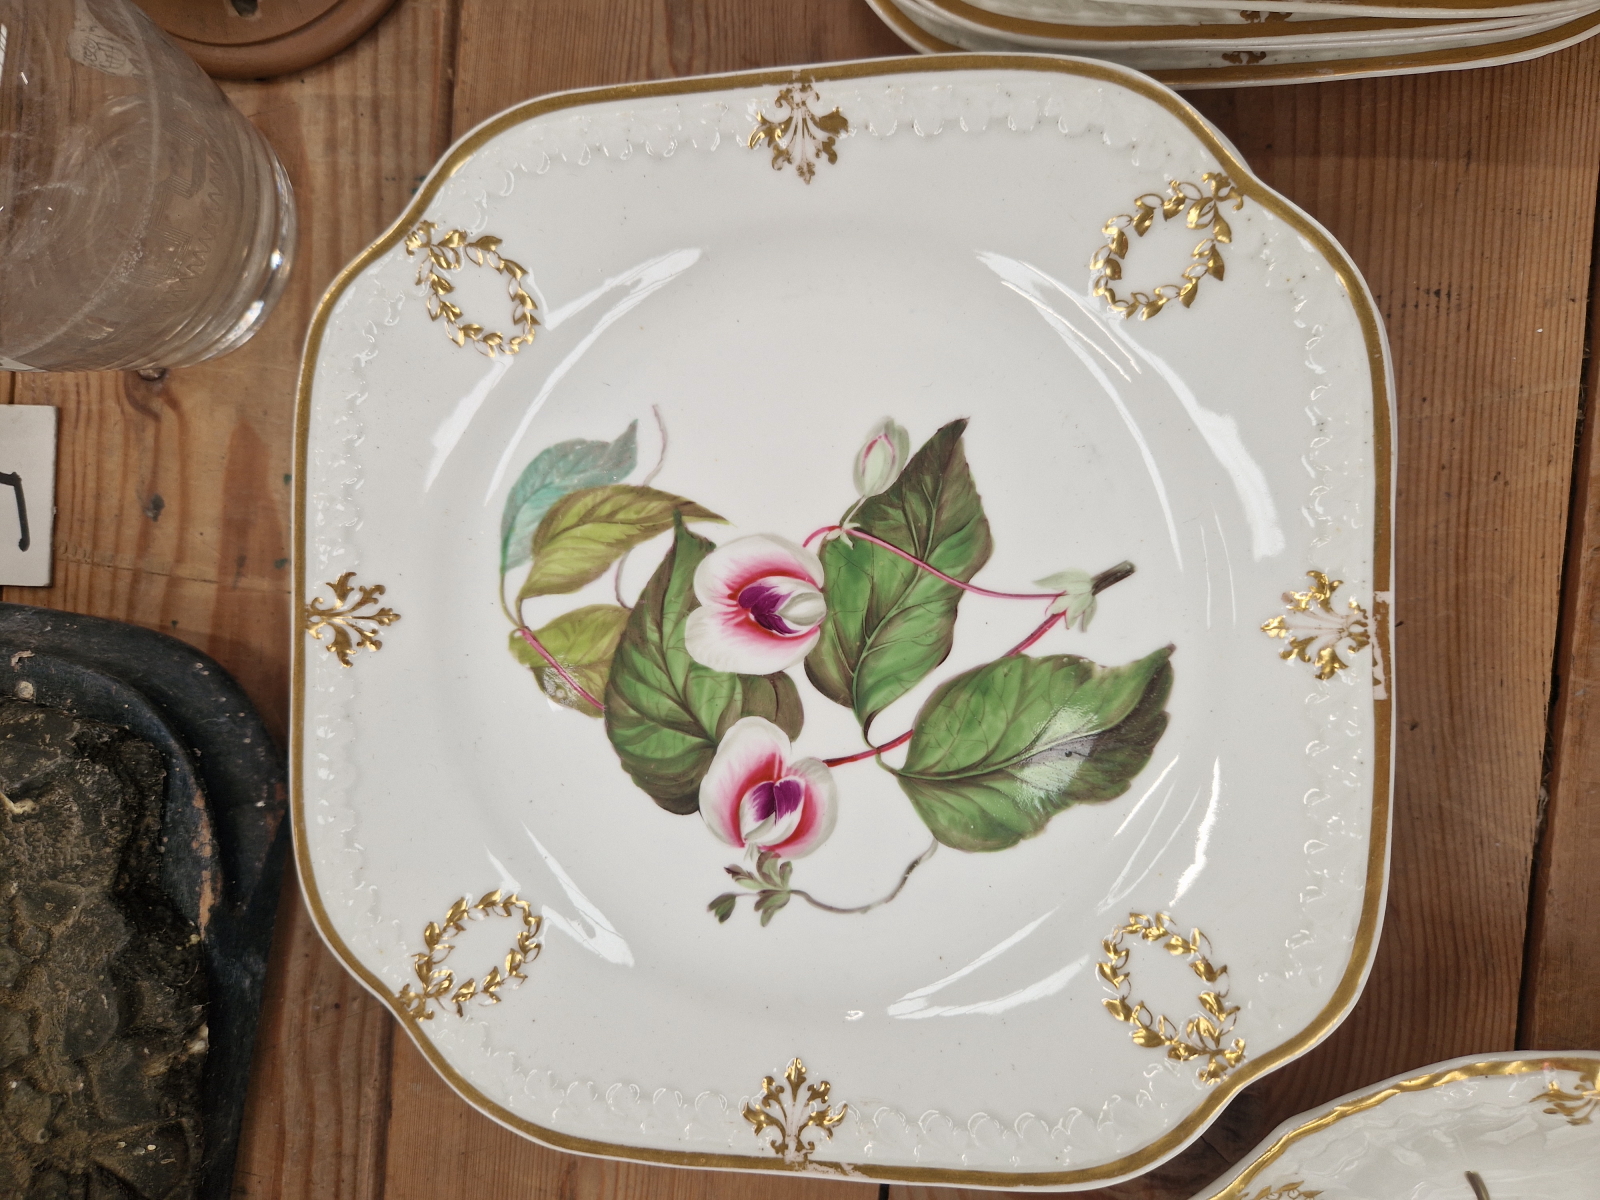 A FINE EARLY 19th C. PORCELAIN DESSERT SERVICE, HAND PAINTED WITH NAMED FLORAL BOTANICAL SPECIMENS - Image 27 of 58